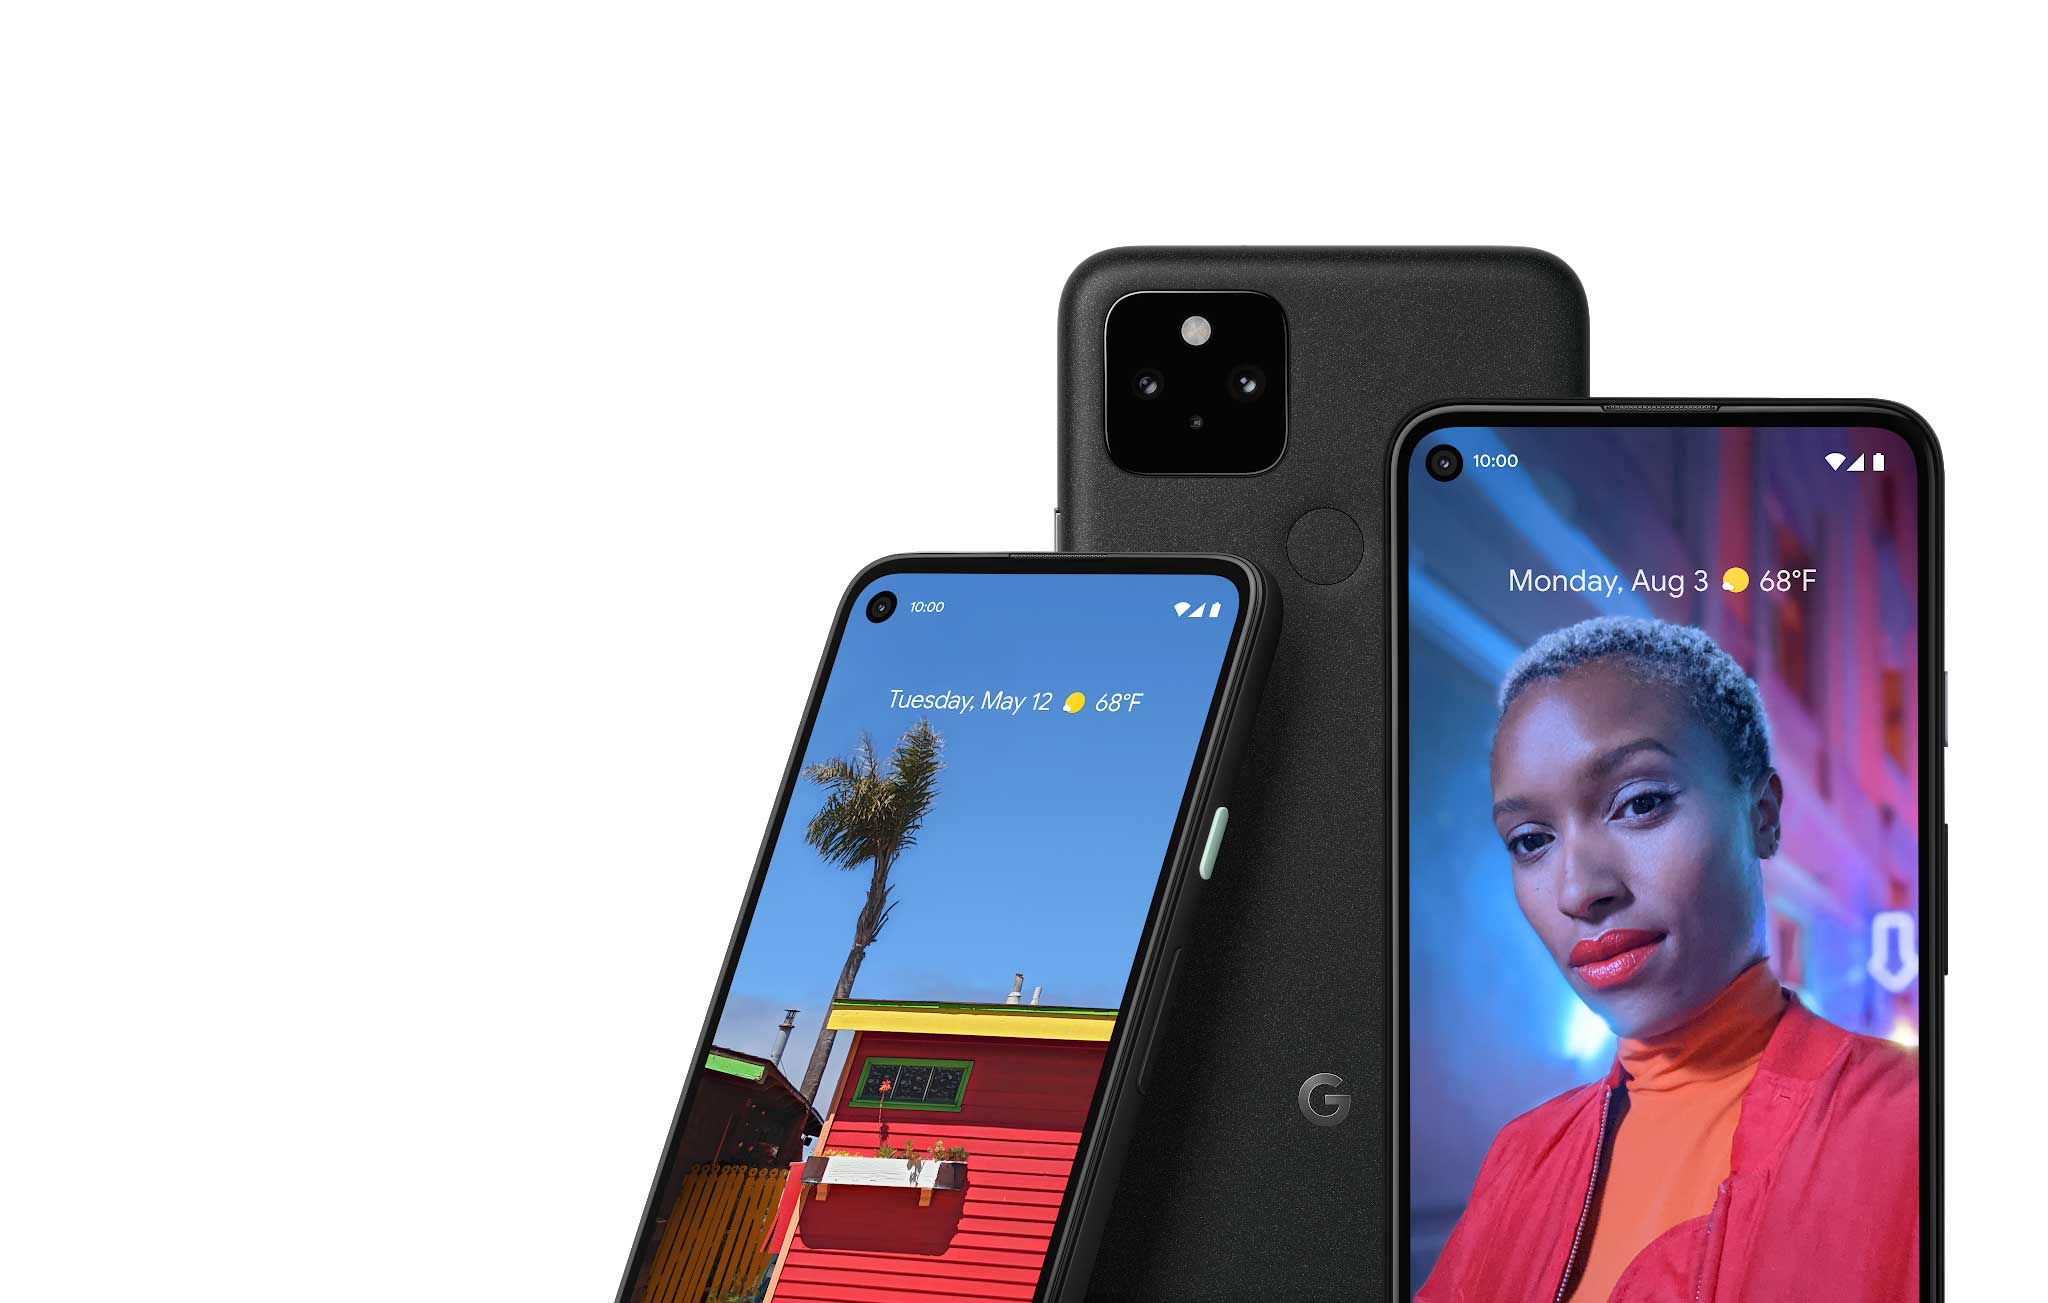 Google Launch Night In Pixel 4a 5G and Pixel 5